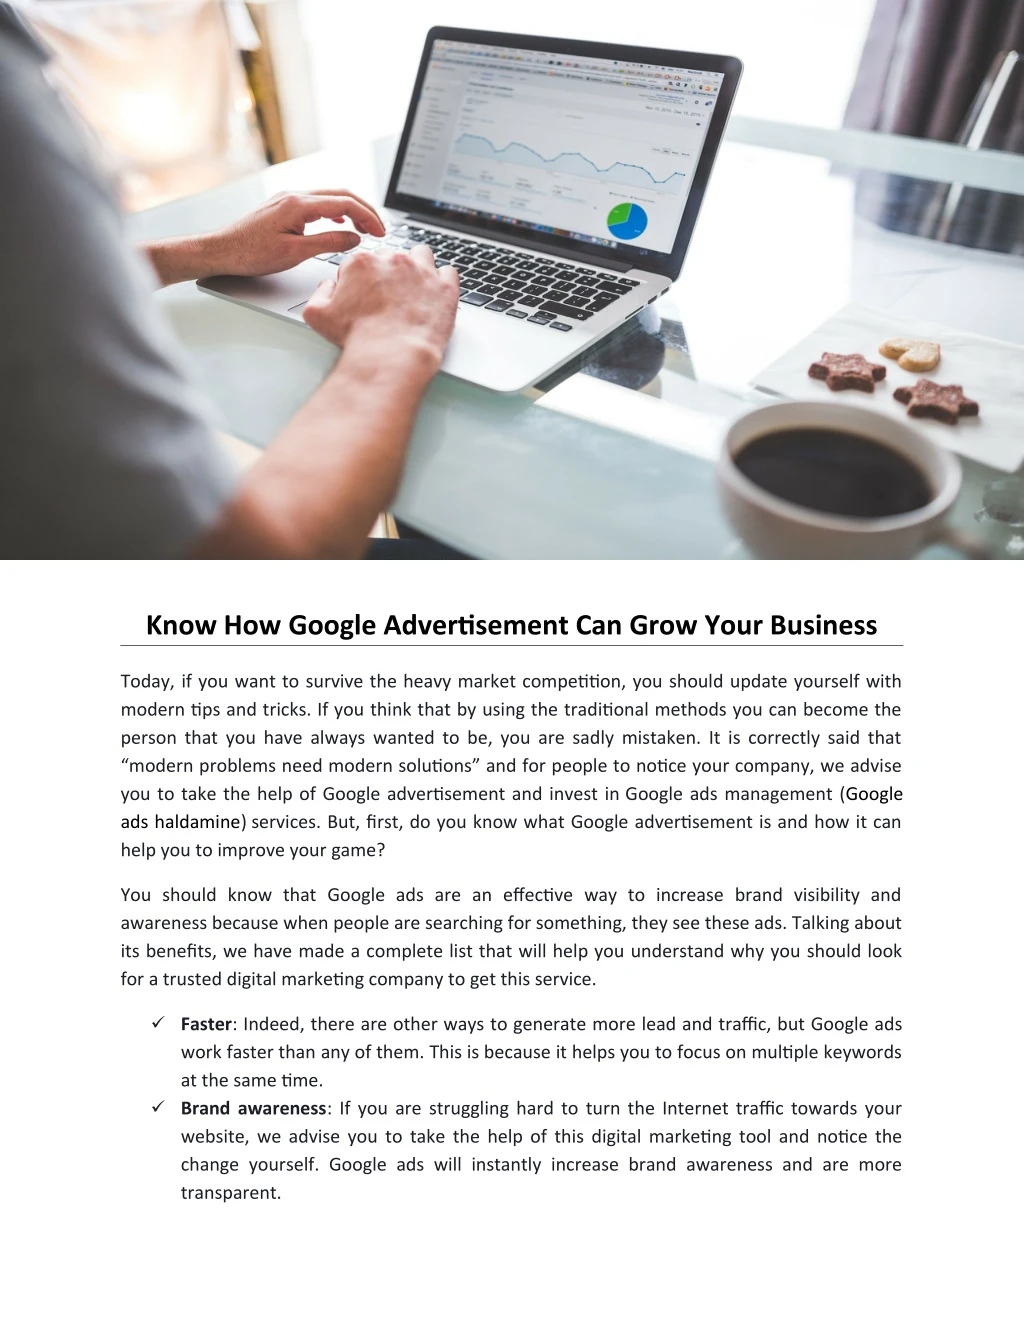 know how google advertisement can grow your